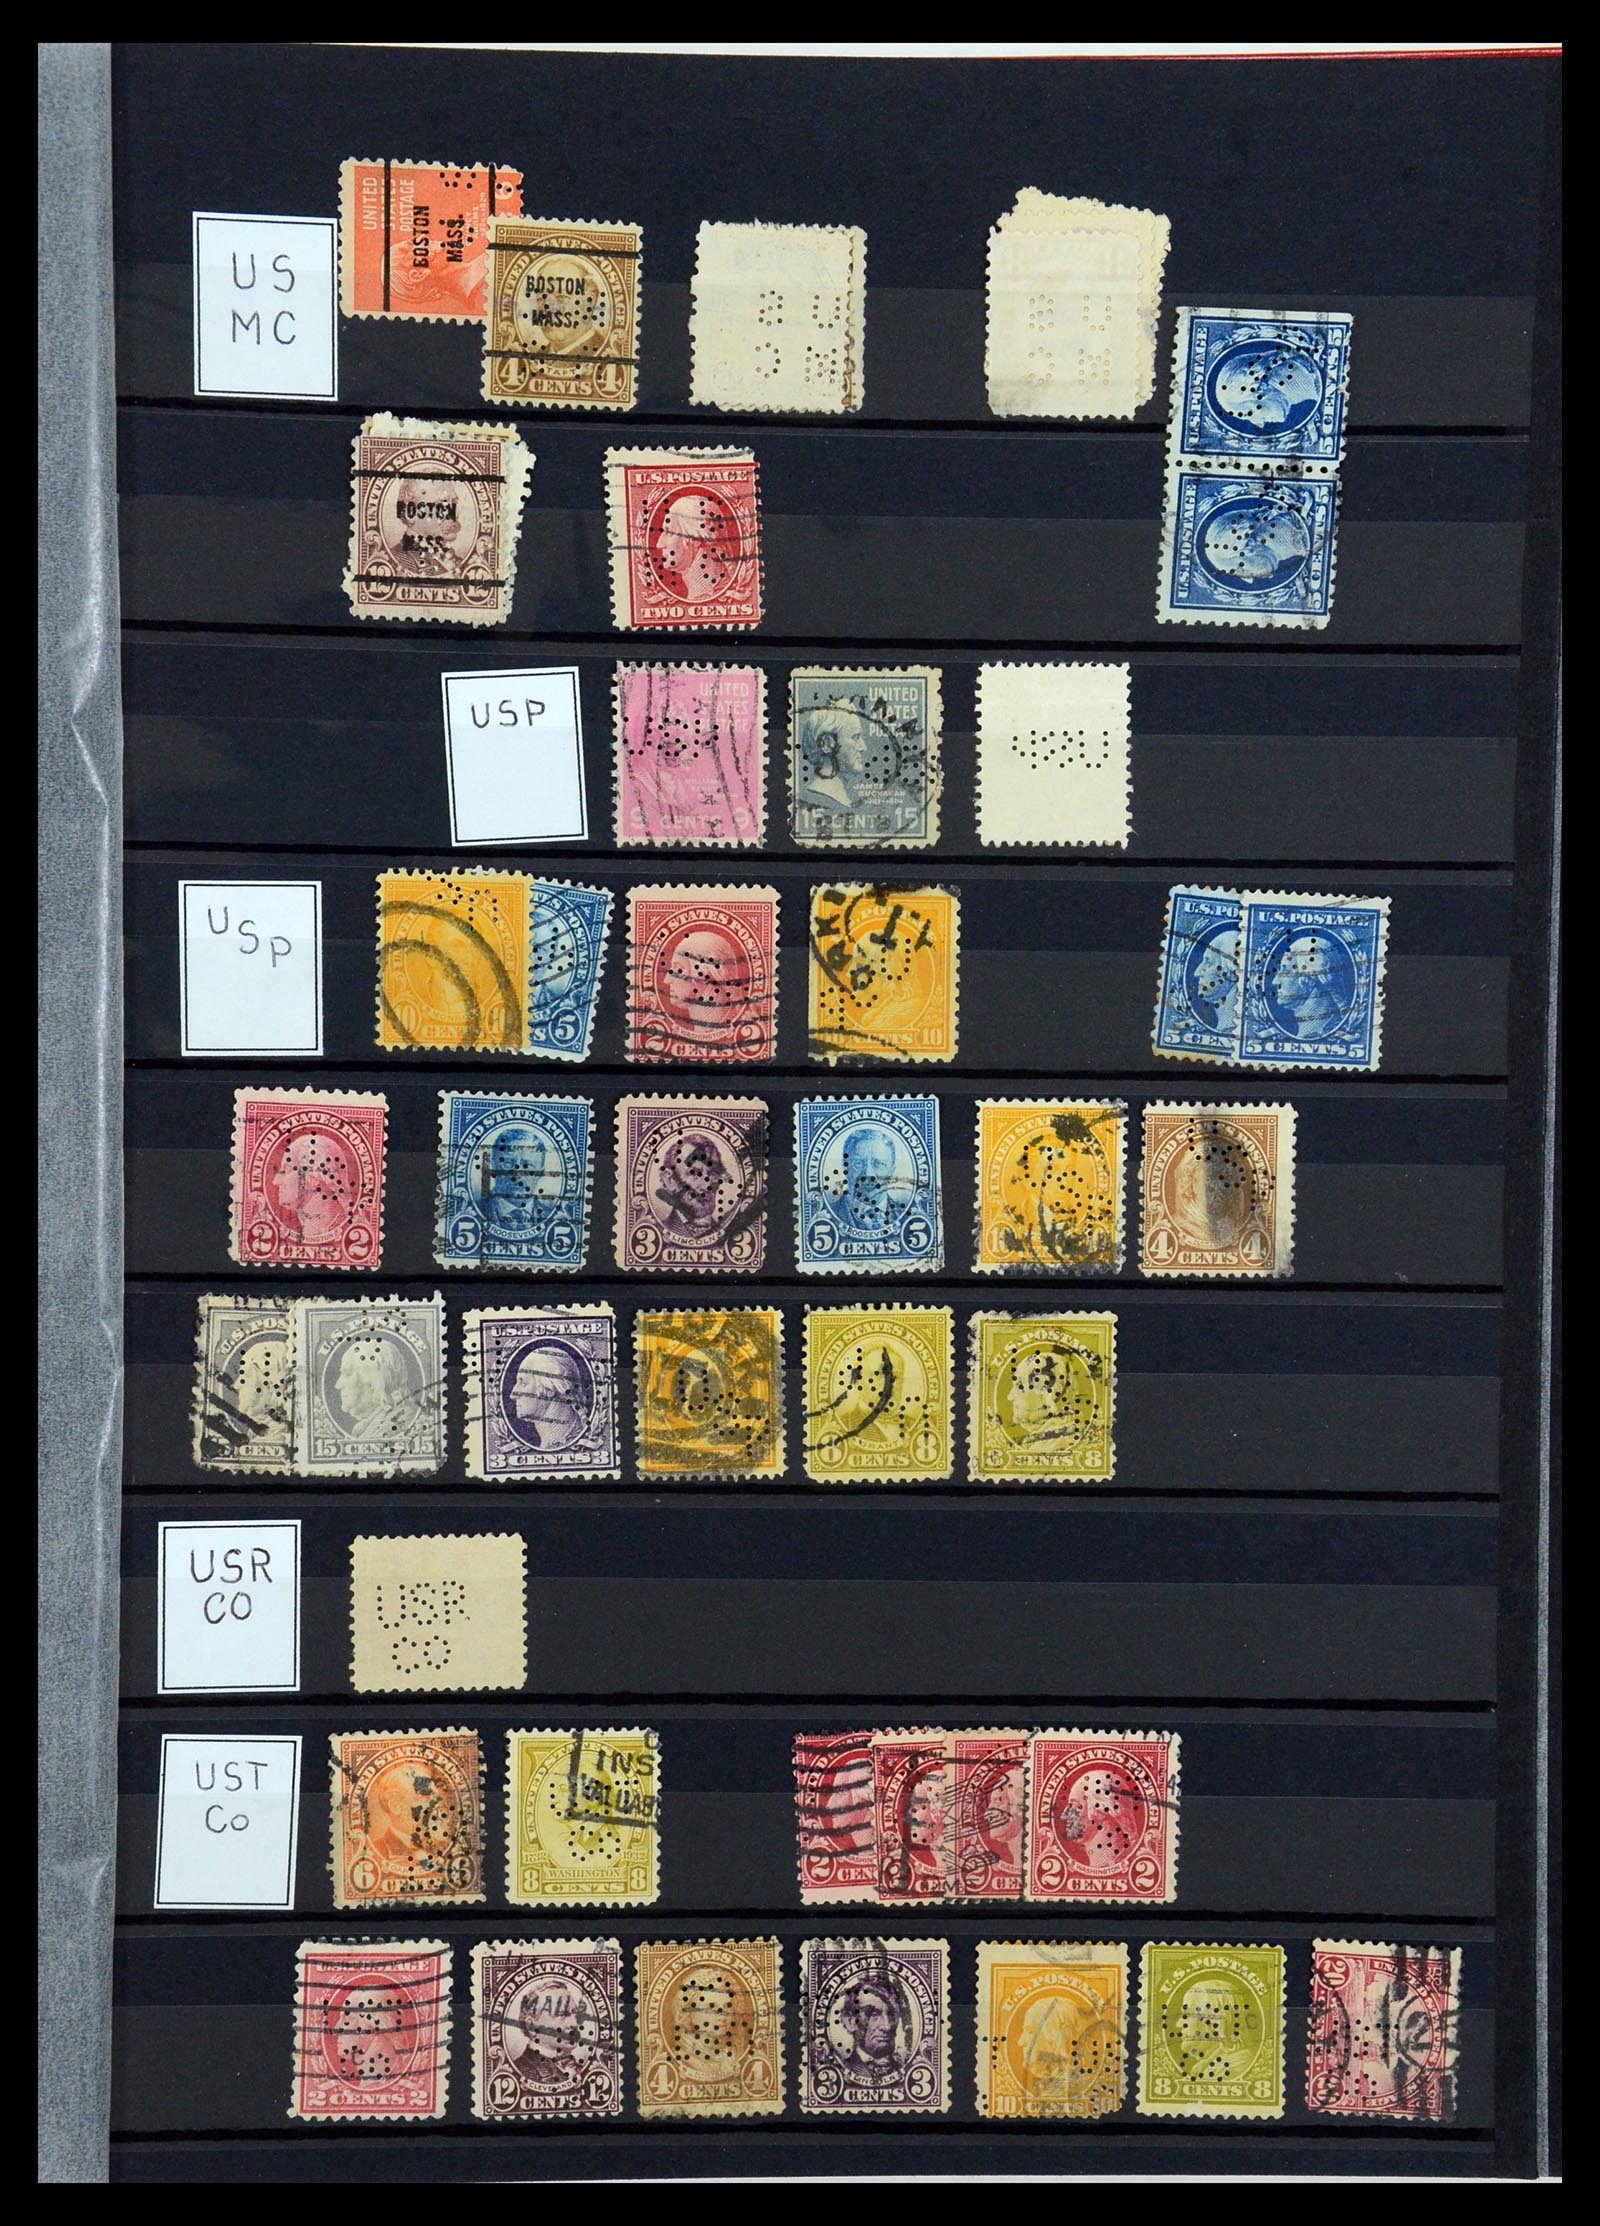 36388 148 - Stamp collection 36388 USA perfins.